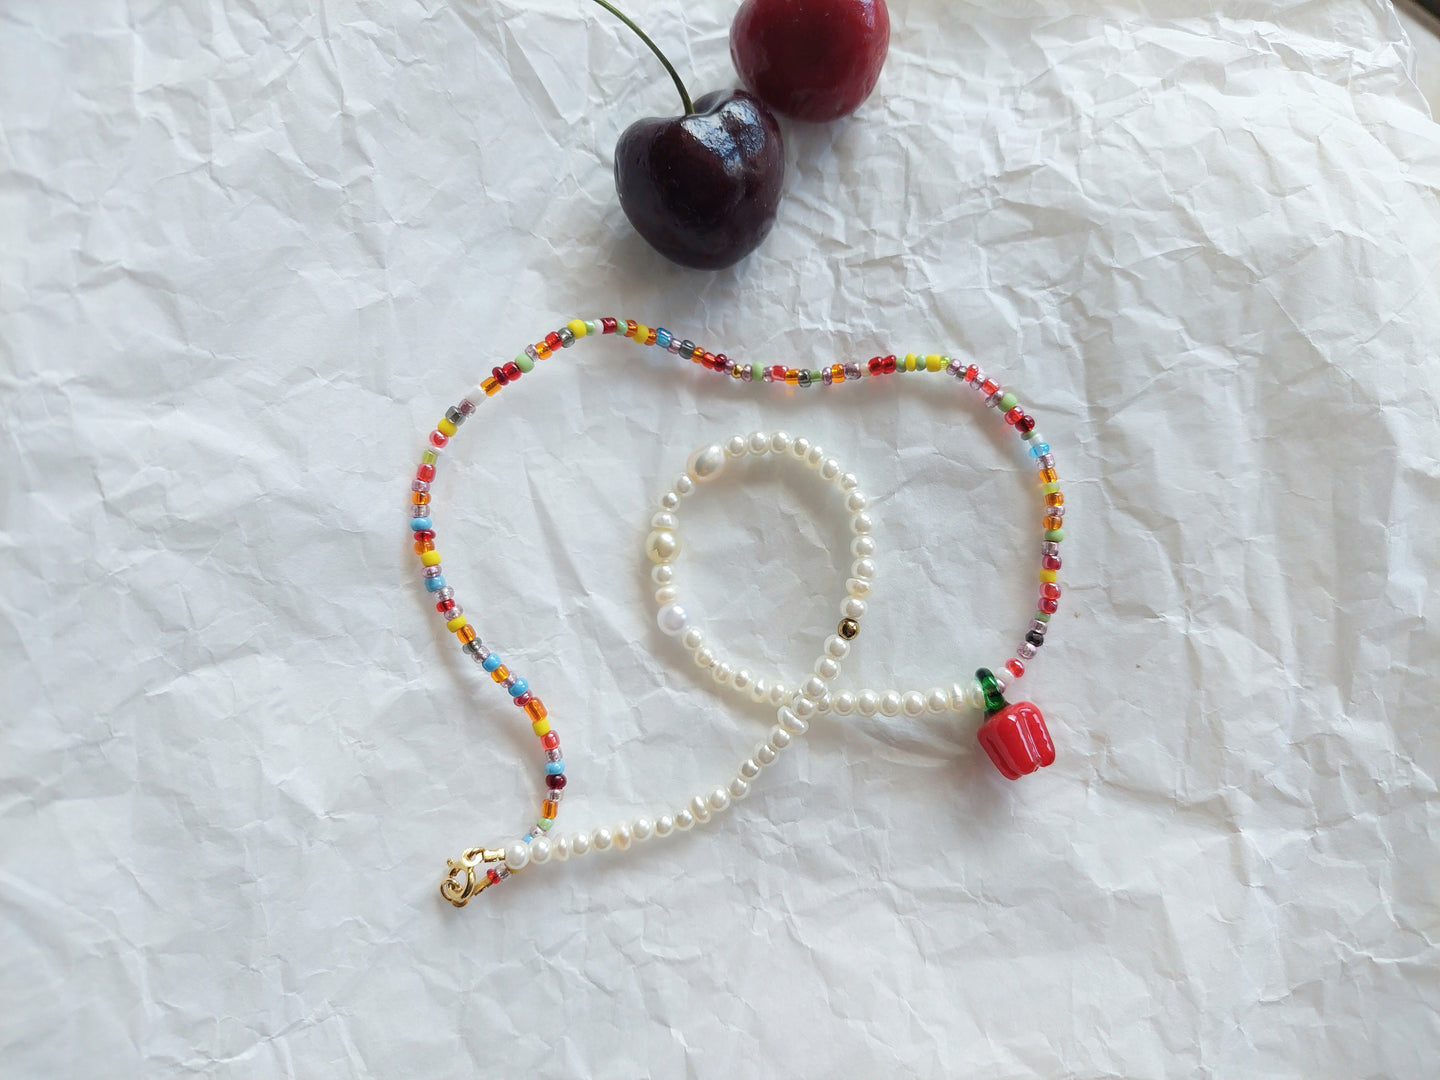 Pepper necklace